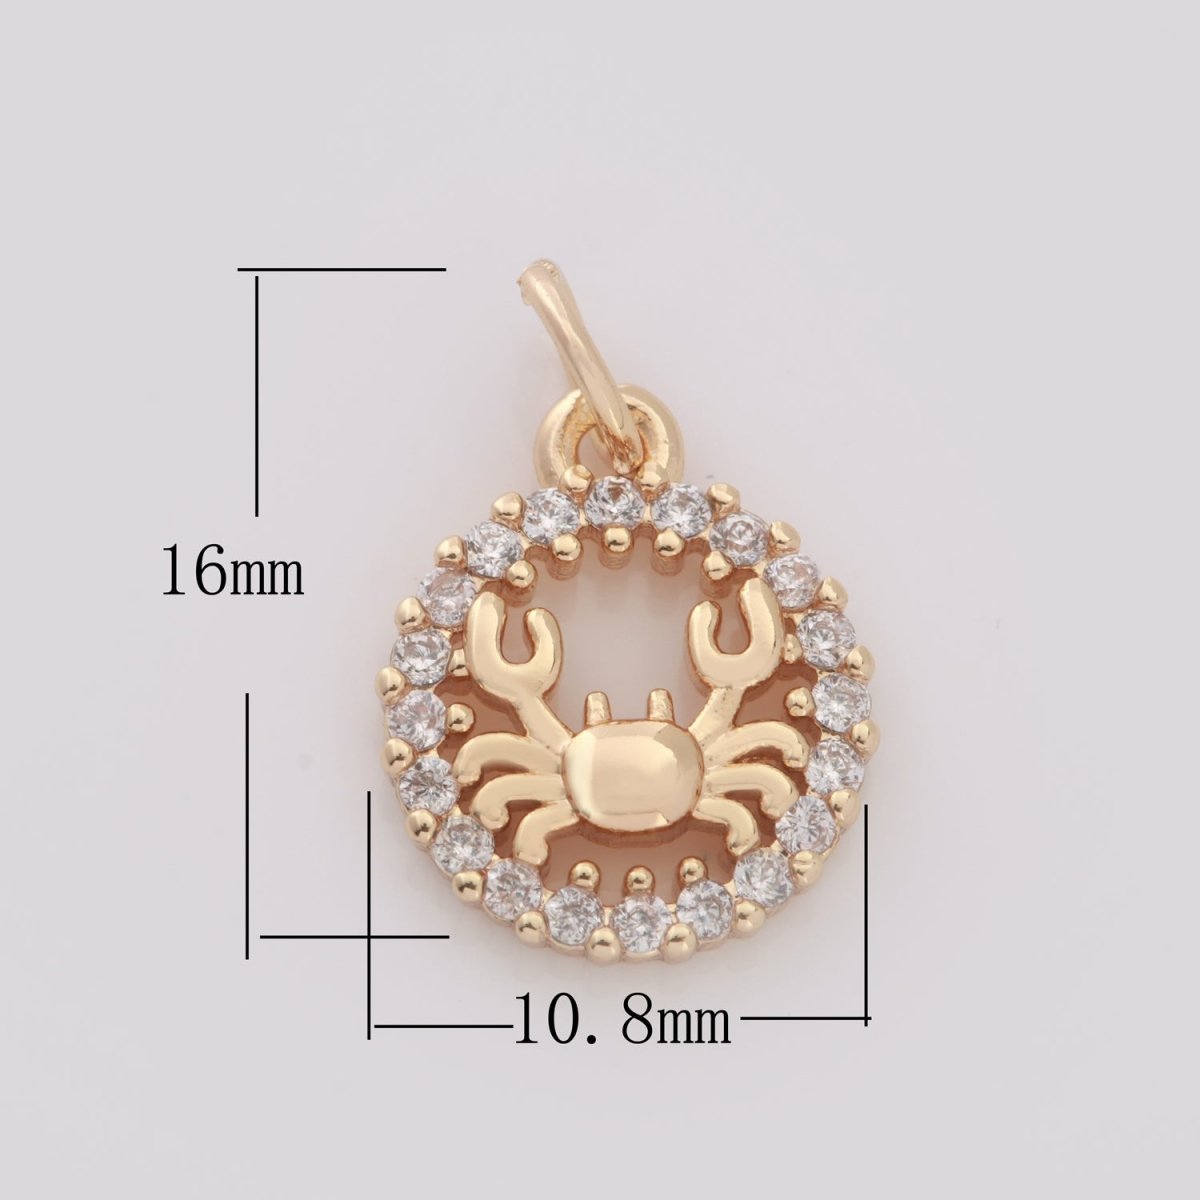 Mini Crab Charm Dainty Wild Crab Beach Animal Under the water inspired for Necklace Earring Bracelet Supply M-749 - DLUXCA